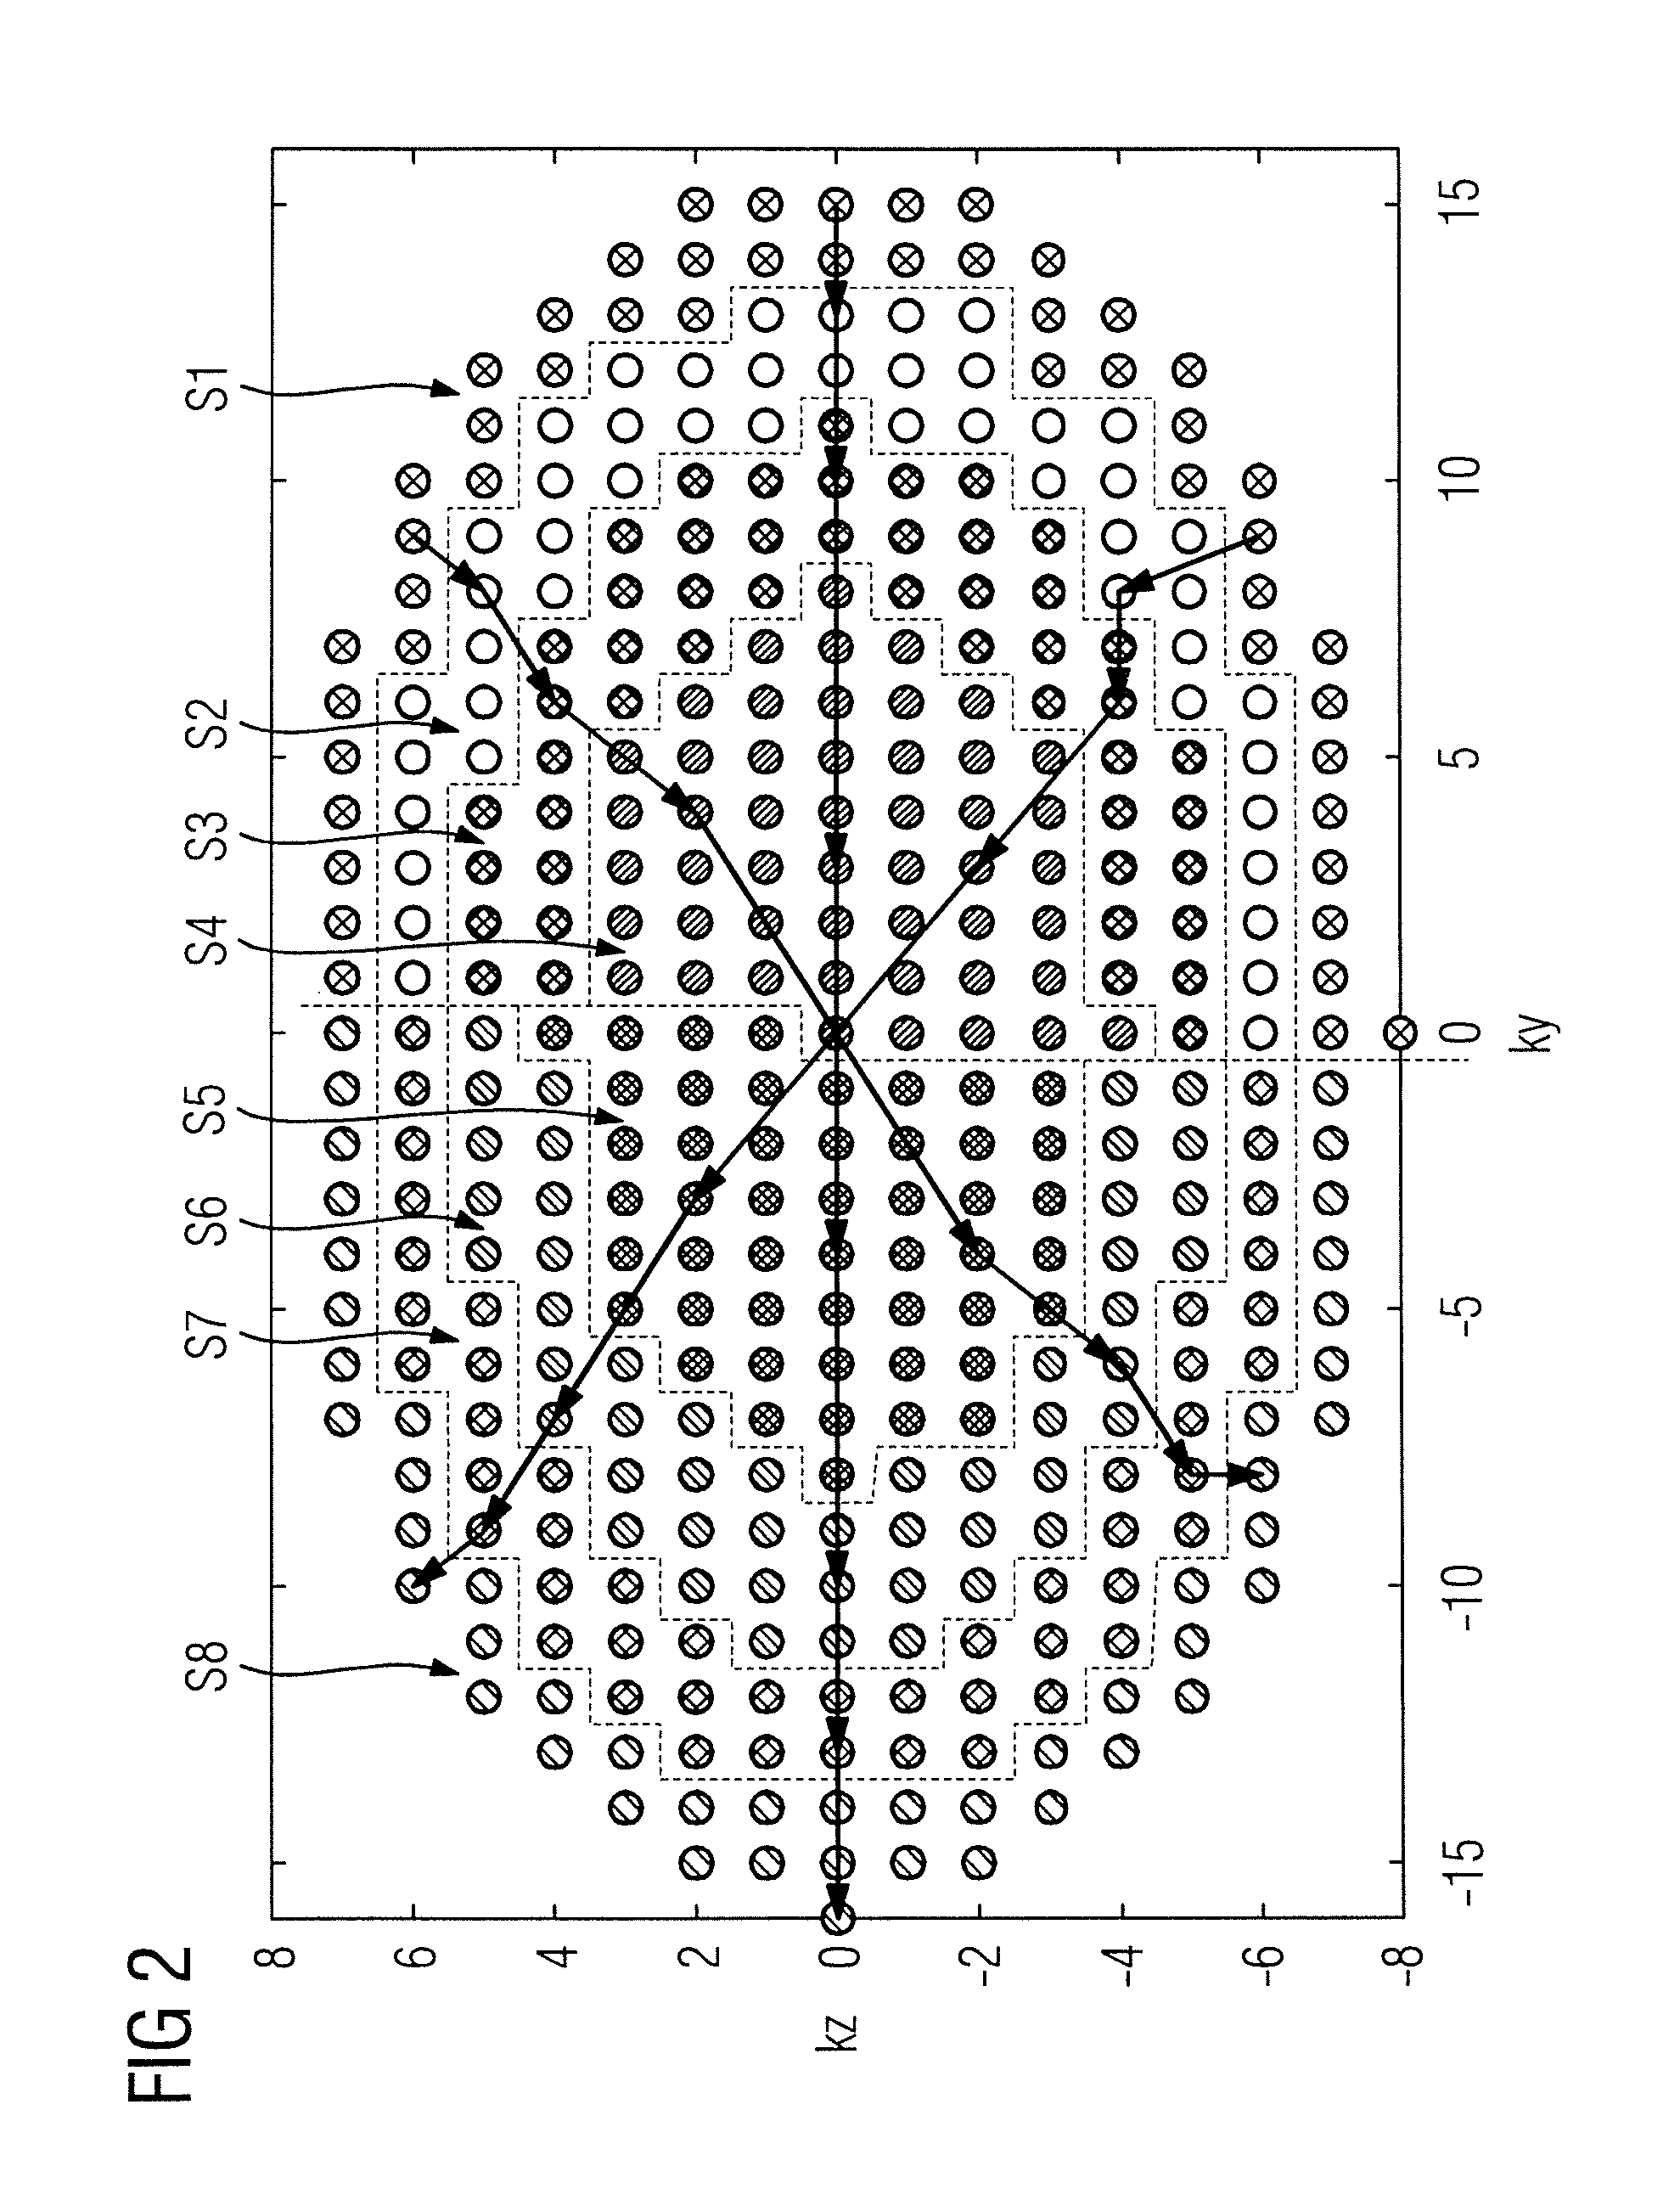 Magnetic resonance method and apparatus for obtaining a set of measured data relating to a breathing object of interest